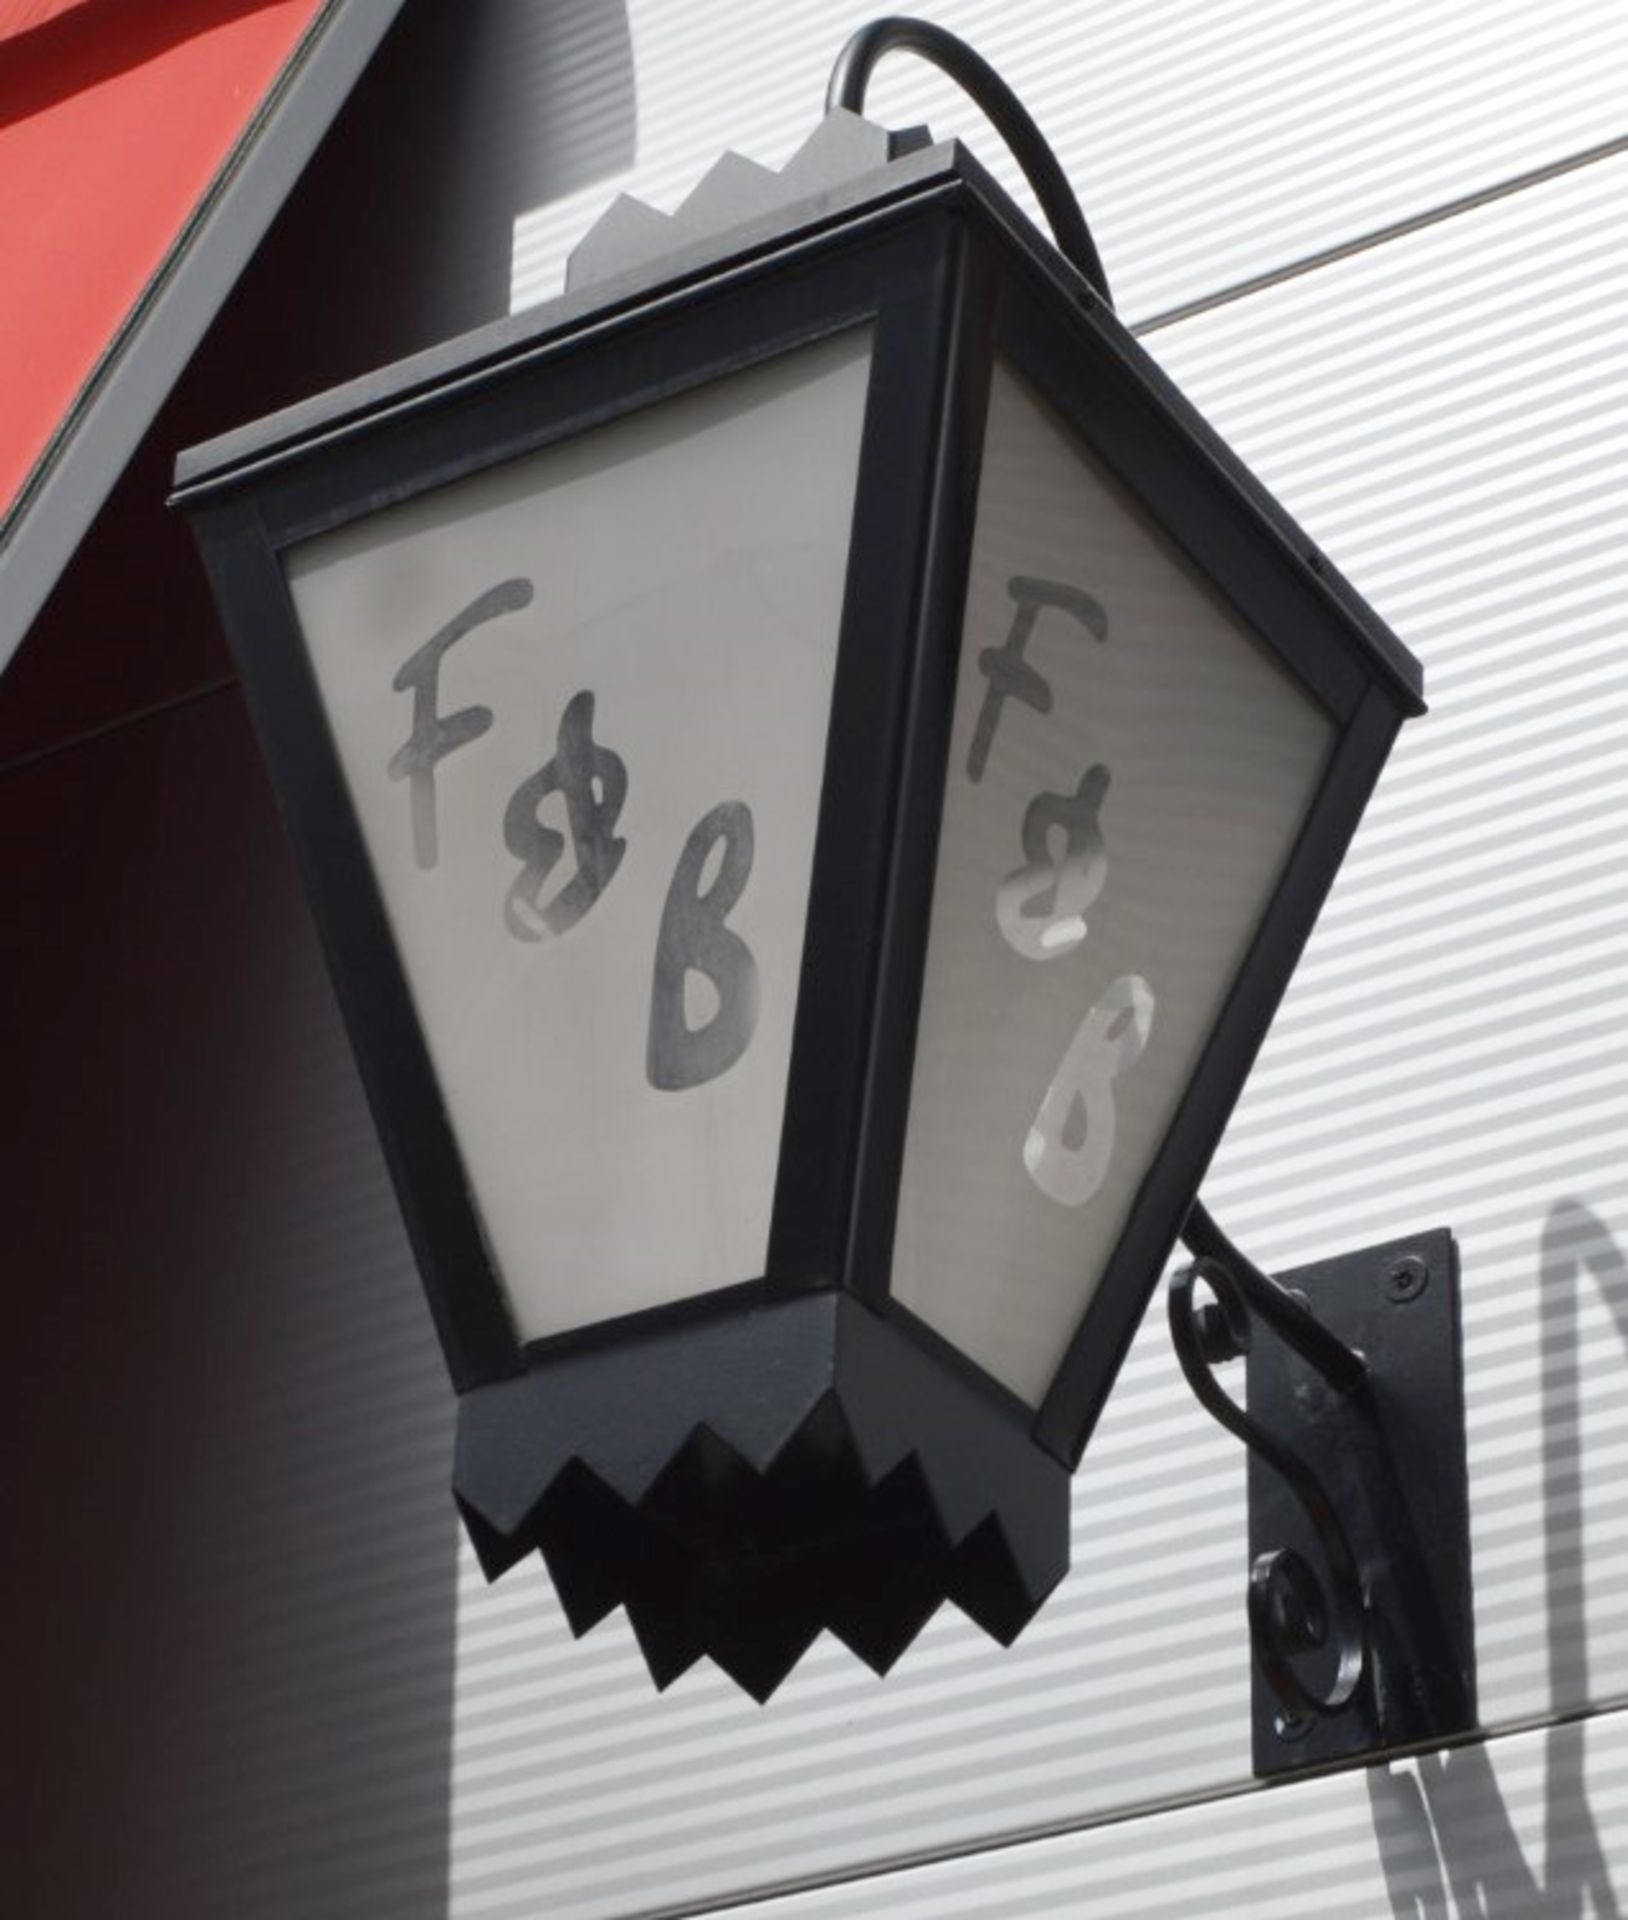 5 x Large Outdoor Wall Mounted Lanterns - CL357 - Location: Bolton BL6 - Image 3 of 3